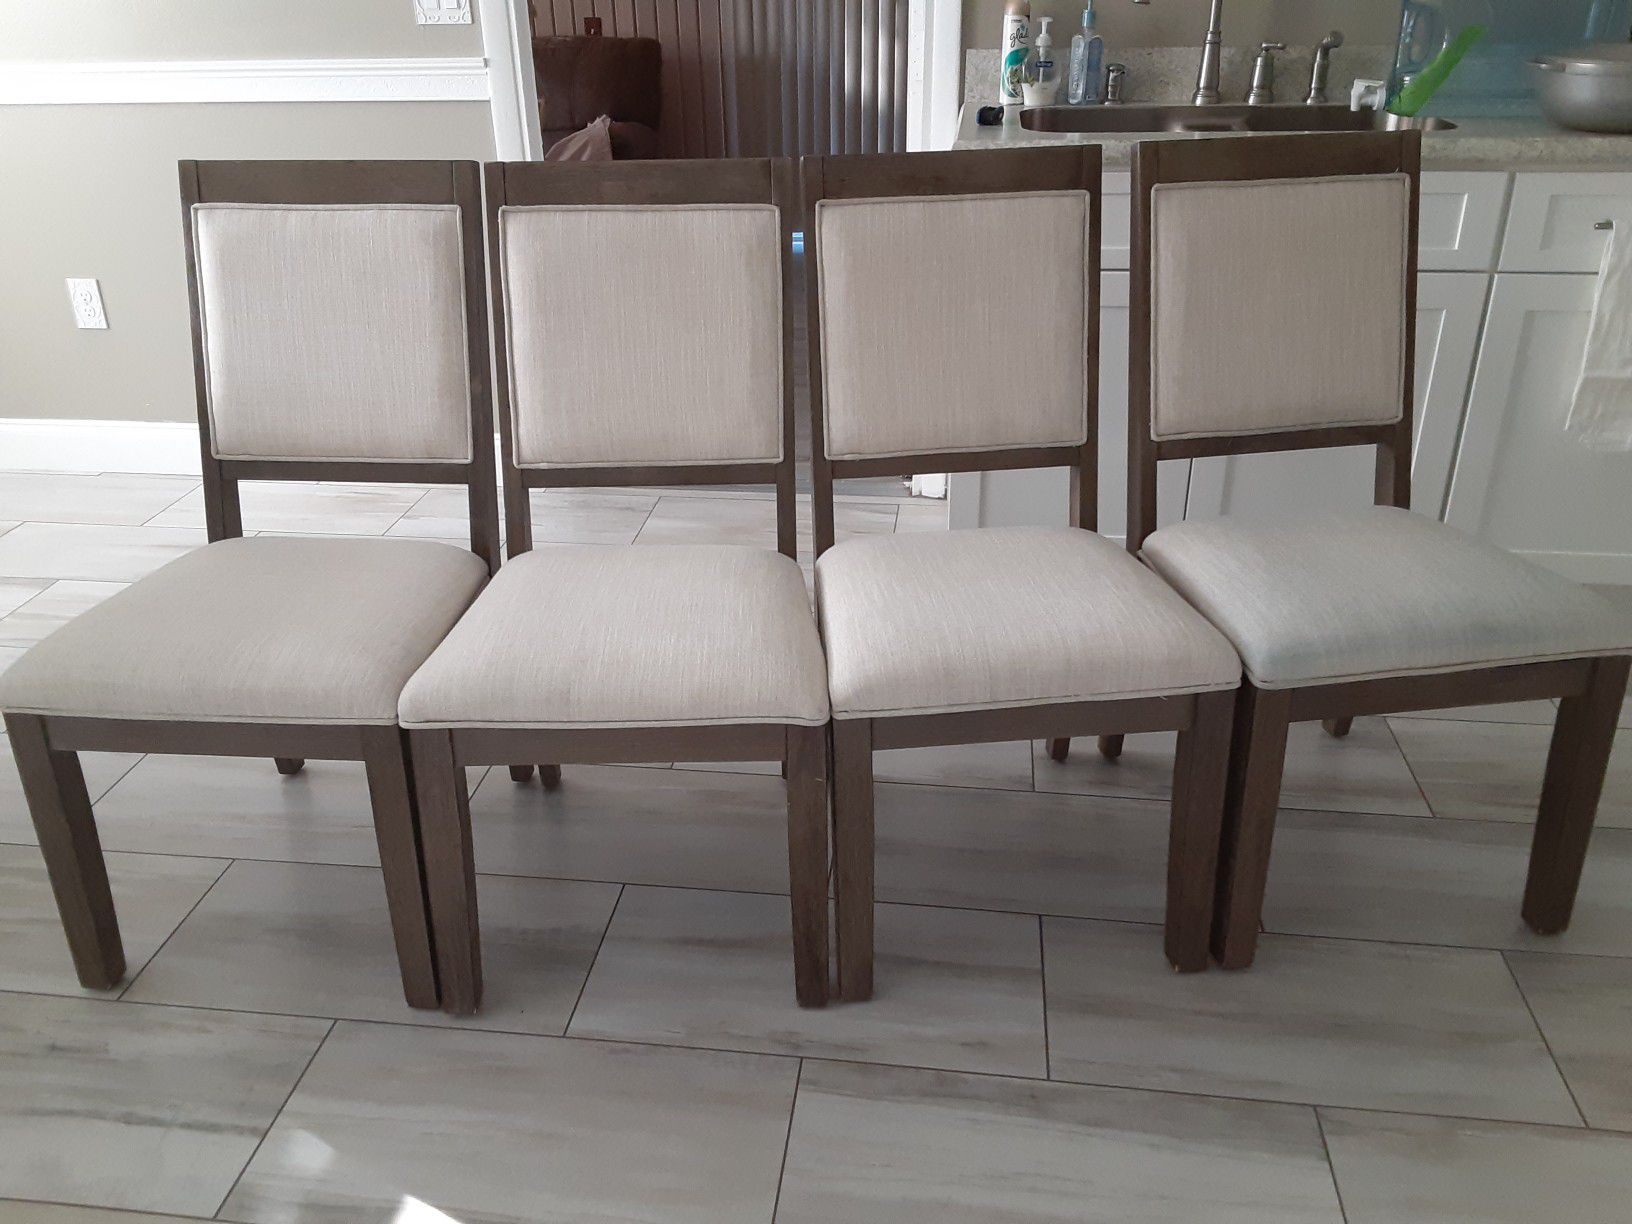 4 wood and material chairs